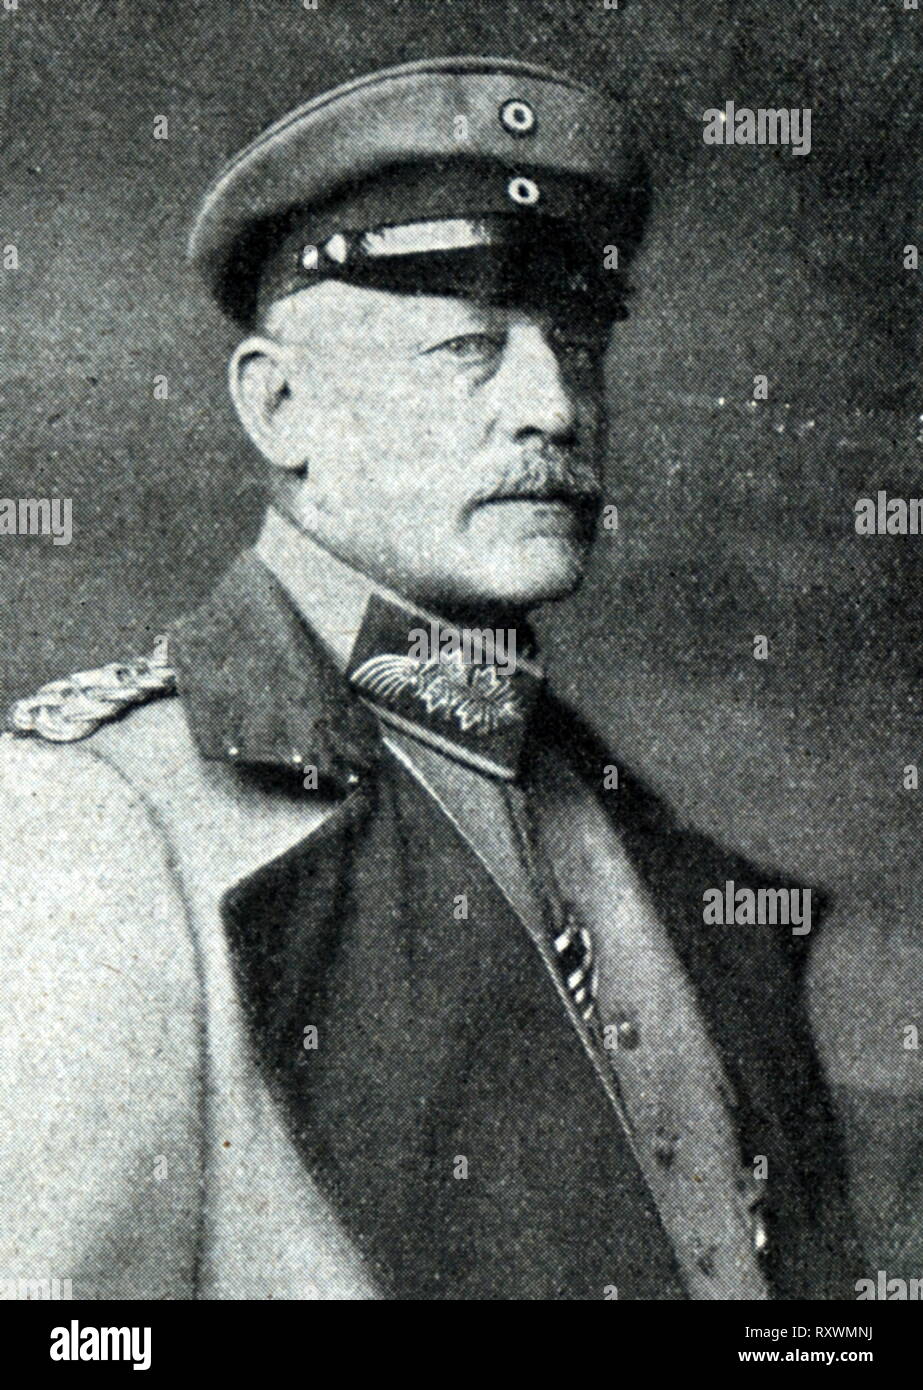 Oskar Emil von Hutier (1857 - 1934), German general during the First World War. He served in the German Army from 1875 to 1919, including war service. During the war, he commanded the army that took Riga in 1917 and was transferred to the Western Front in 1918 to participate in the Michael offensive that year. He is frequently but mistakenly credited with inventing the stormtrooper tactics his forces employed to great effect during the Michael offensive. After retiring from the Army in 1919, he presided over the German Officers' League until his death on 5 December 1934. Stock Photo